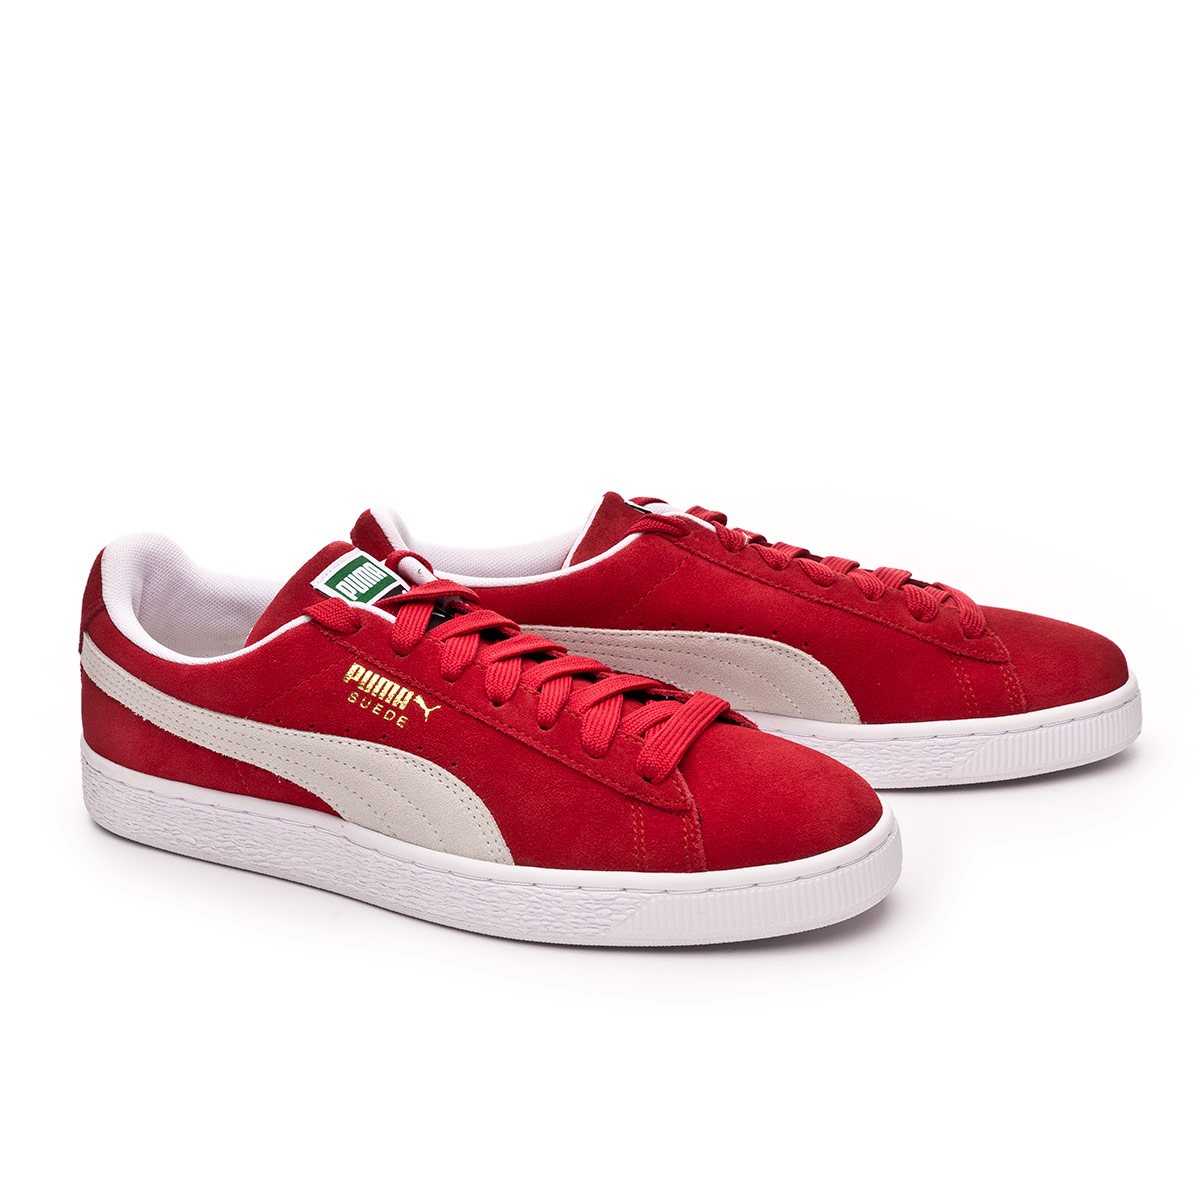 puma boots red and white